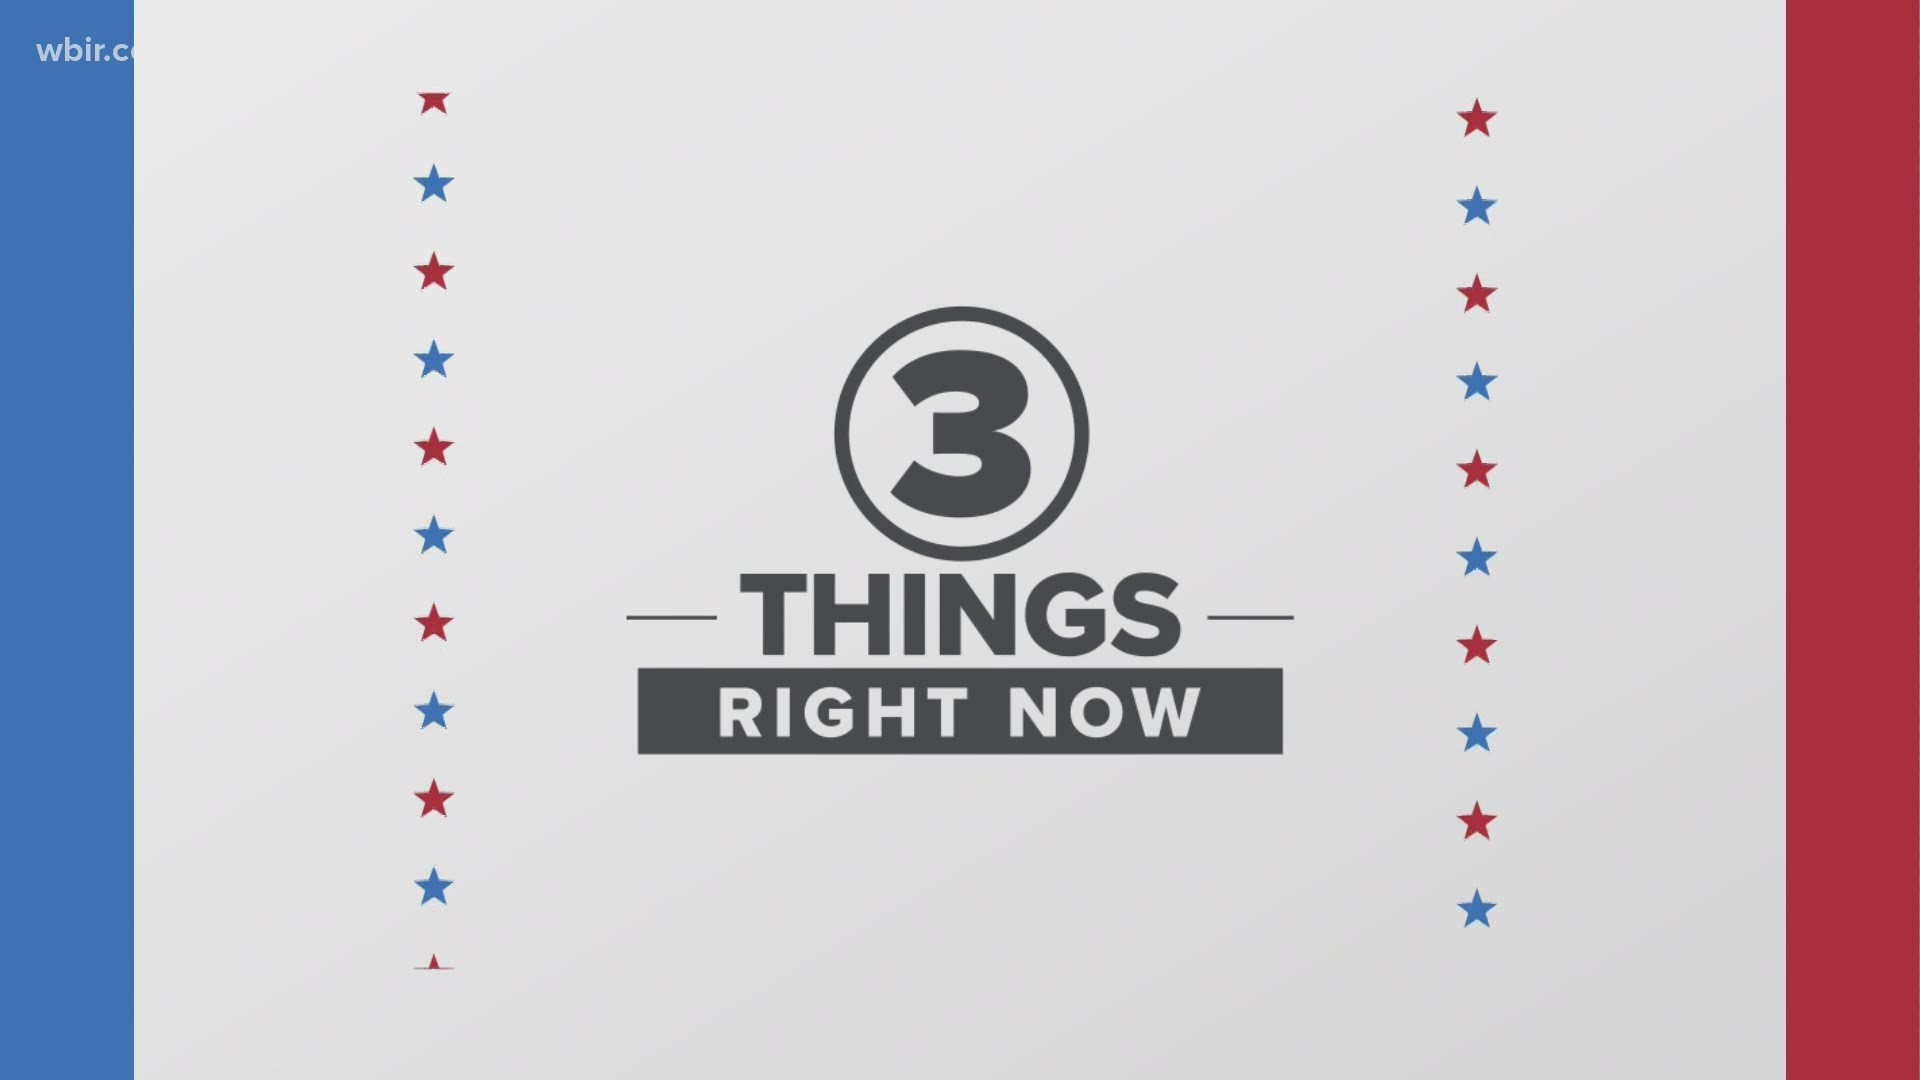 Here are the three things you need to know about the election for Friday, Nov. 13.